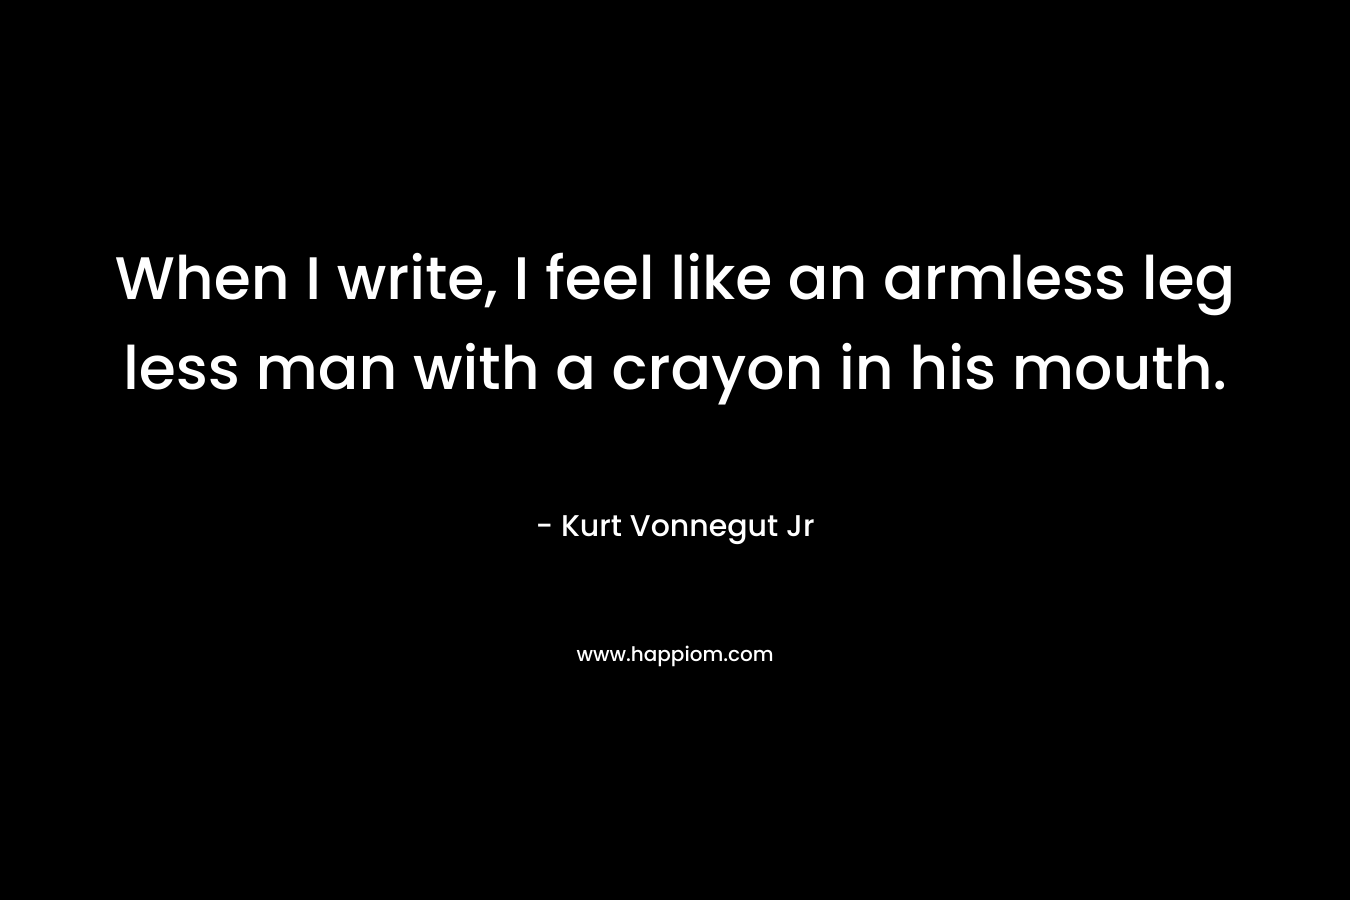 When I write, I feel like an armless leg less man with a crayon in his mouth.